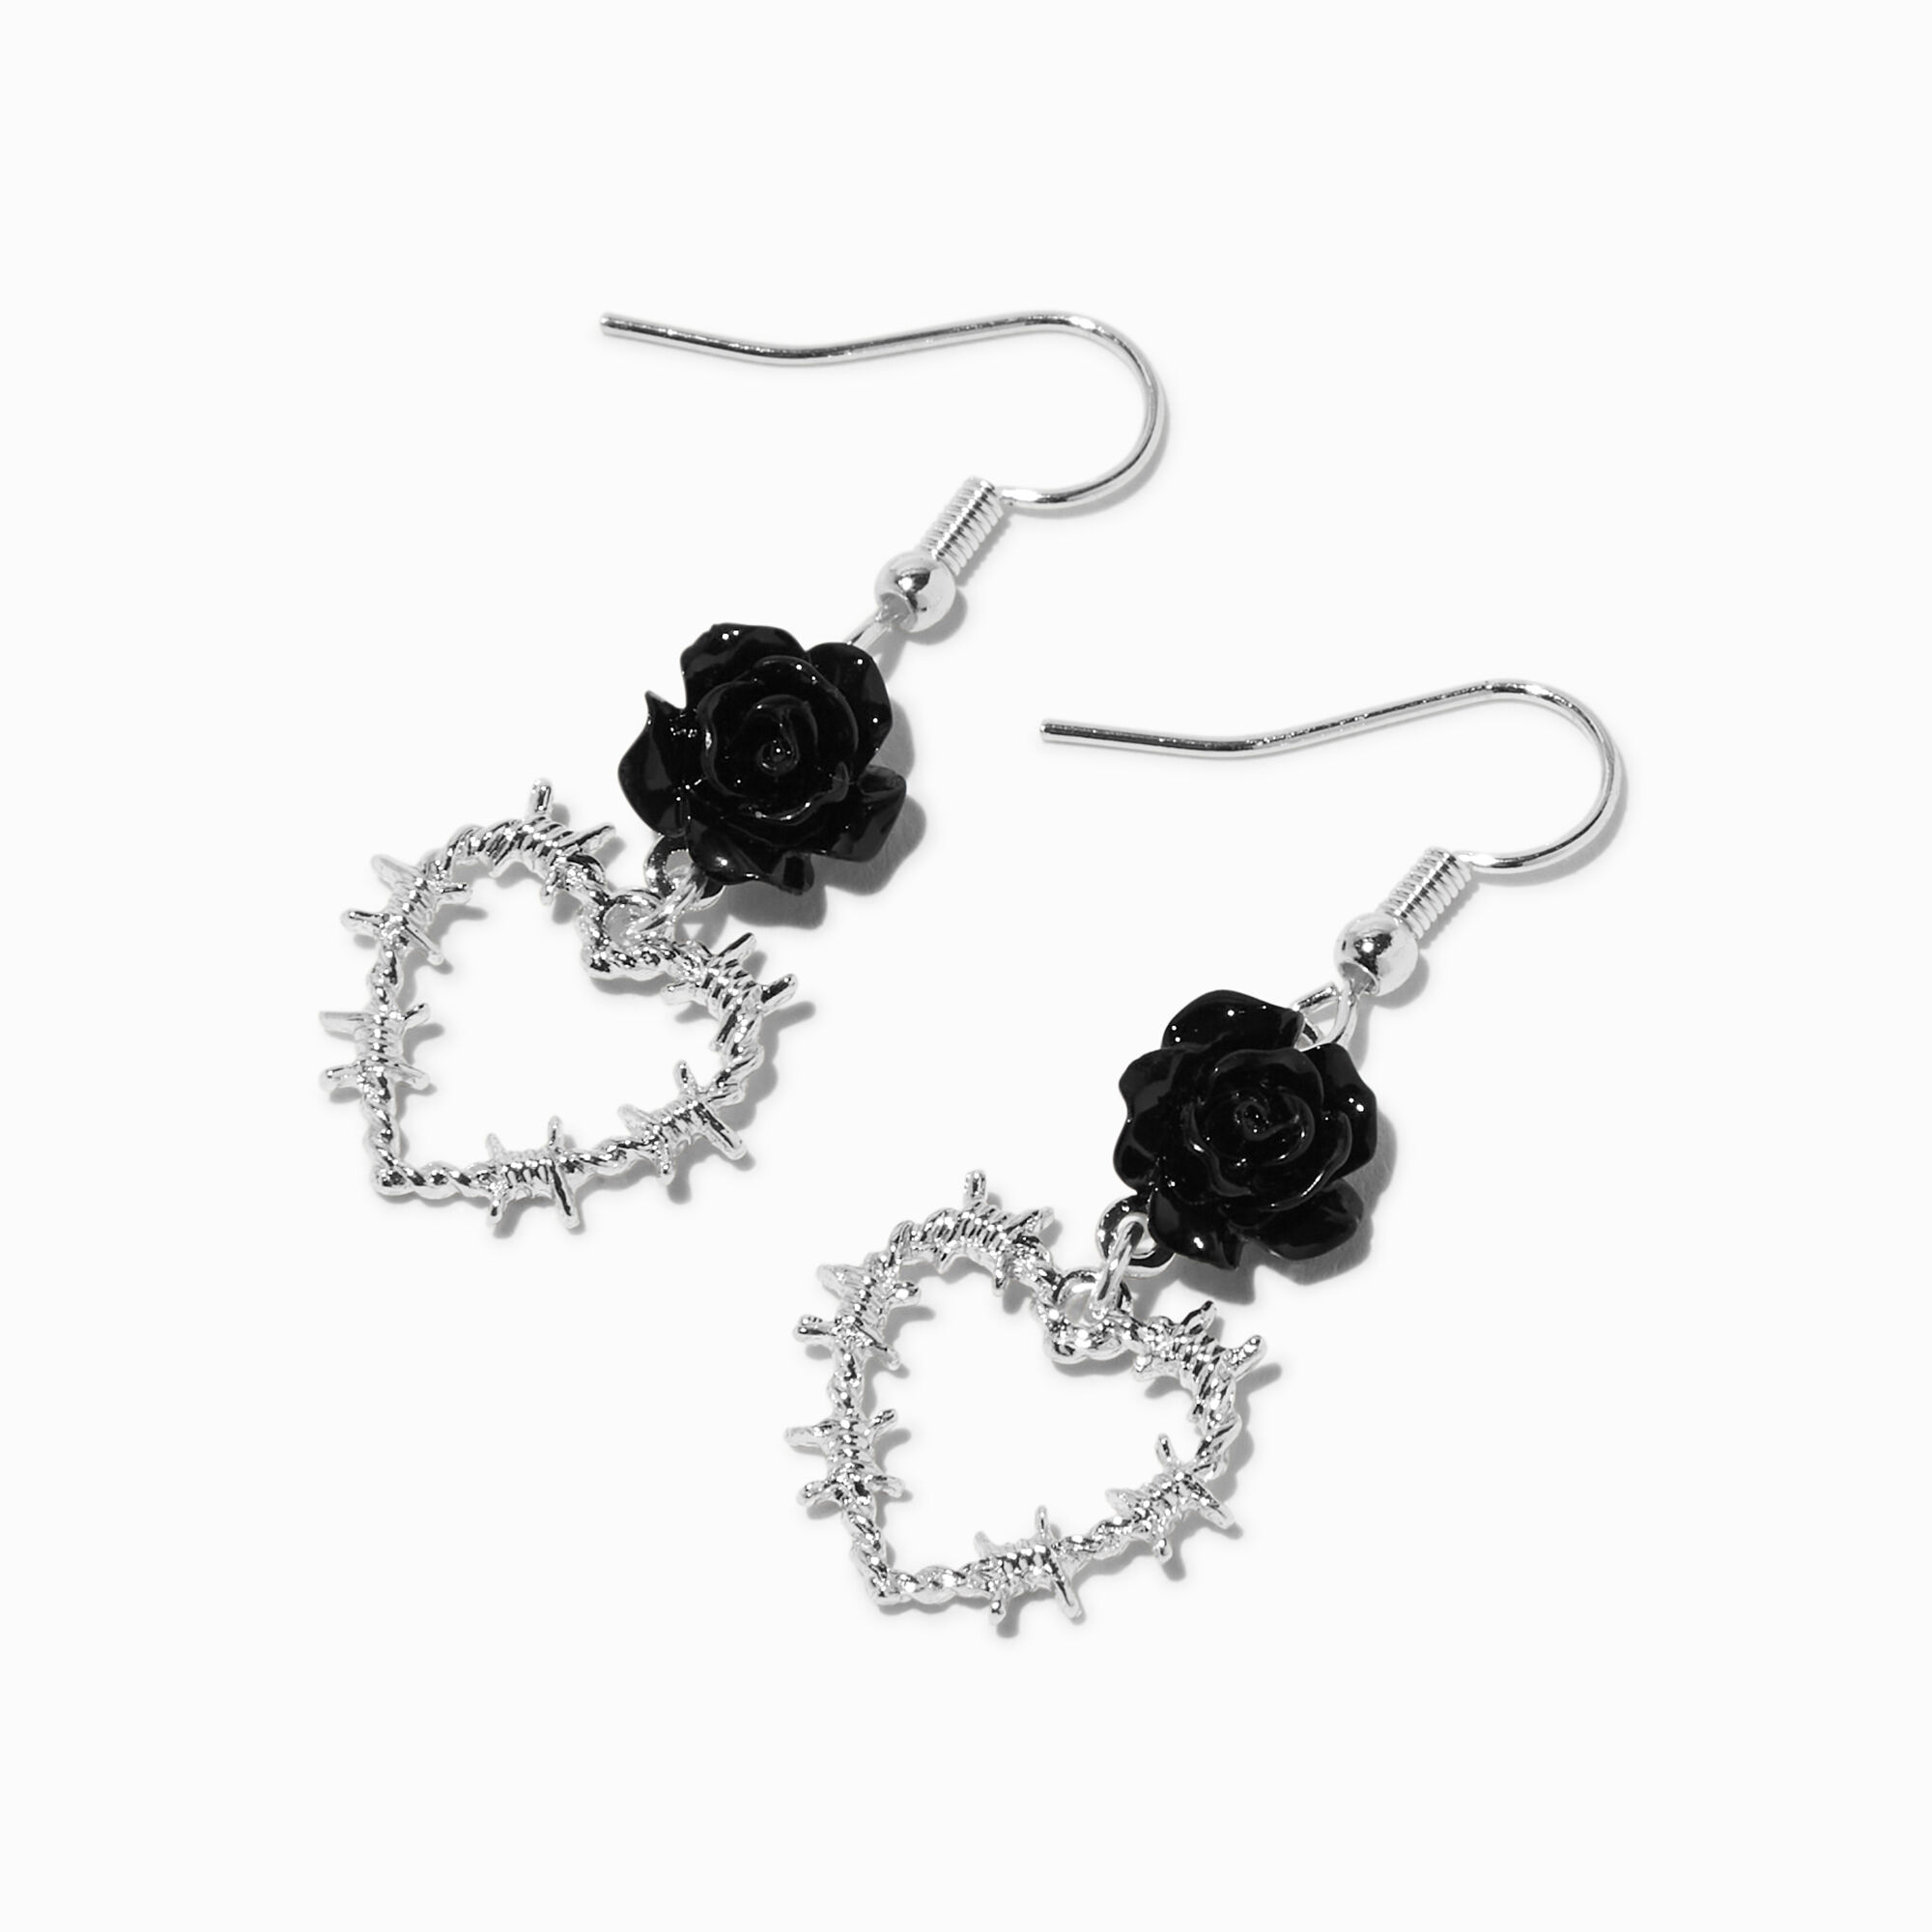 View Claires Rose Barbed Wire Heart 1 Drop Earrings Black information